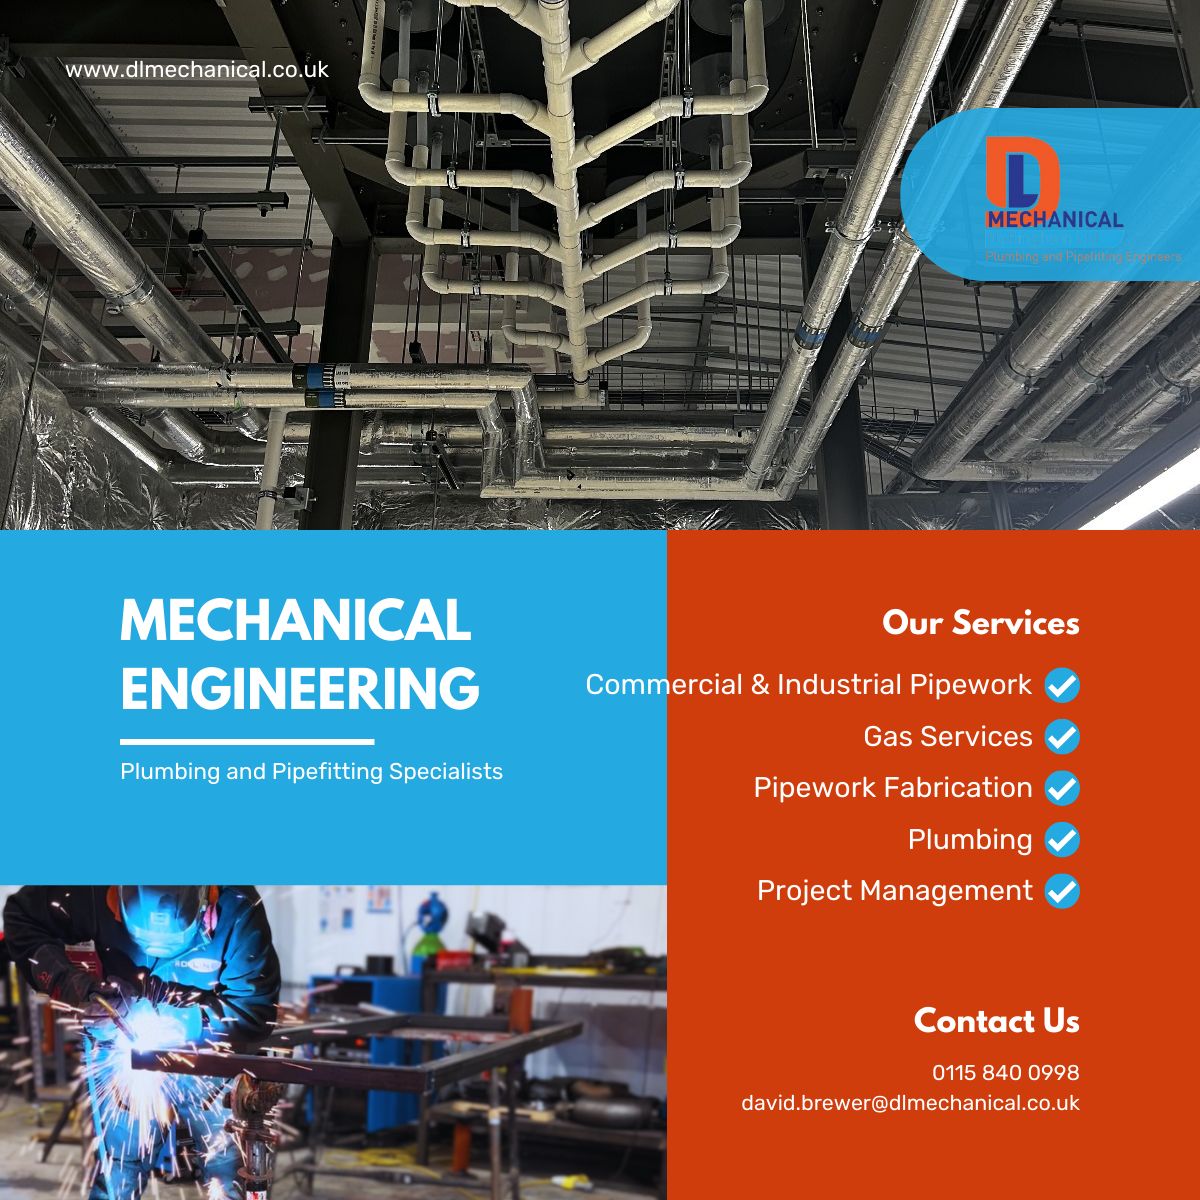 Just some of the professional services we offer here at DL Mechanical 🙌

📞 0115 840 0998
📲 Message us
💻 dlmechanical.co.uk 

#mechanicalengineer #welding #plumbing #constructionuk #construction #plantroom #maincontractor #contractor #prefabrication #manufacturing #steel